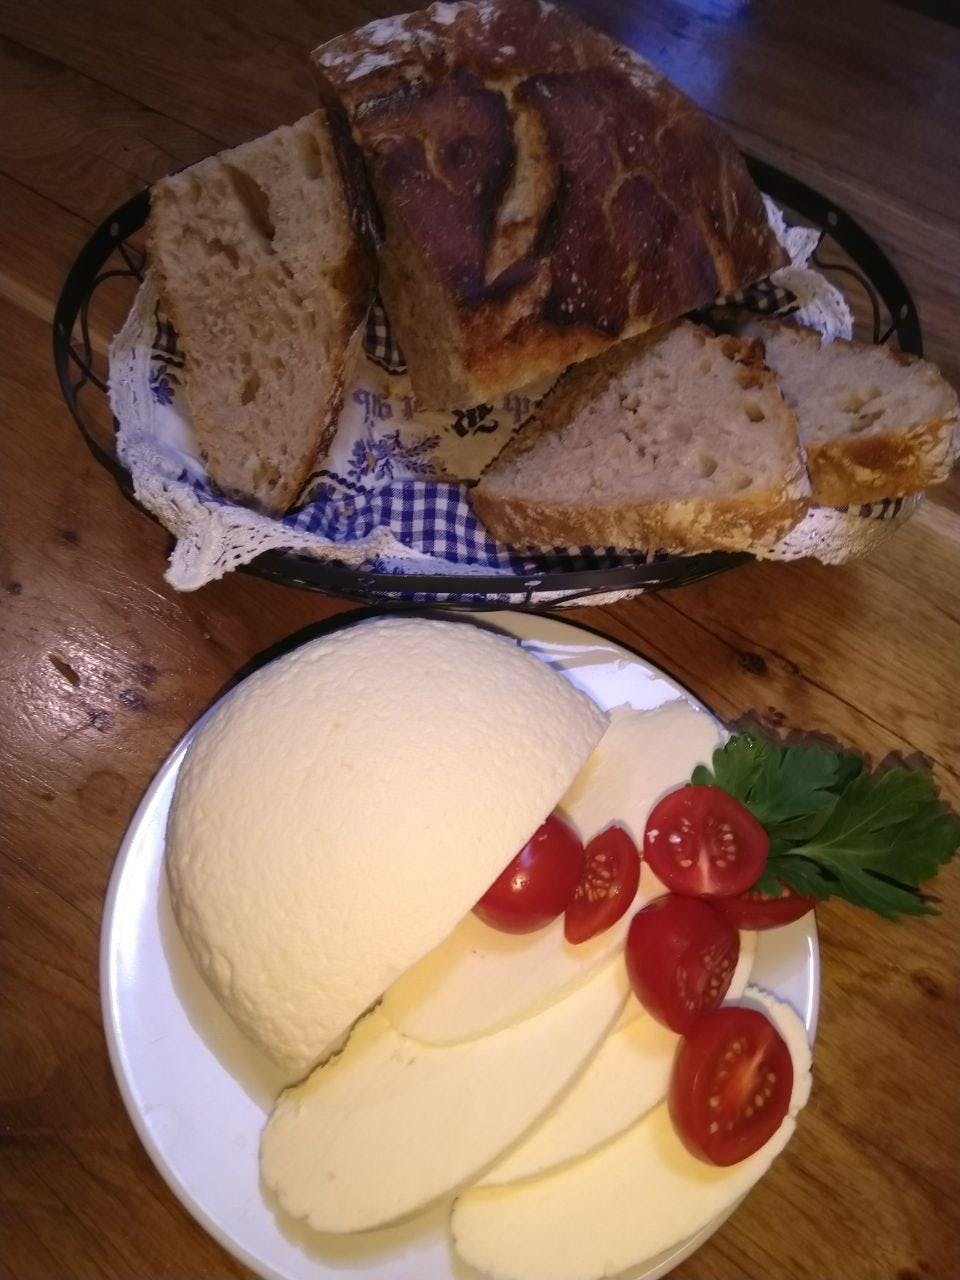 Homemade cheese with homemade bread